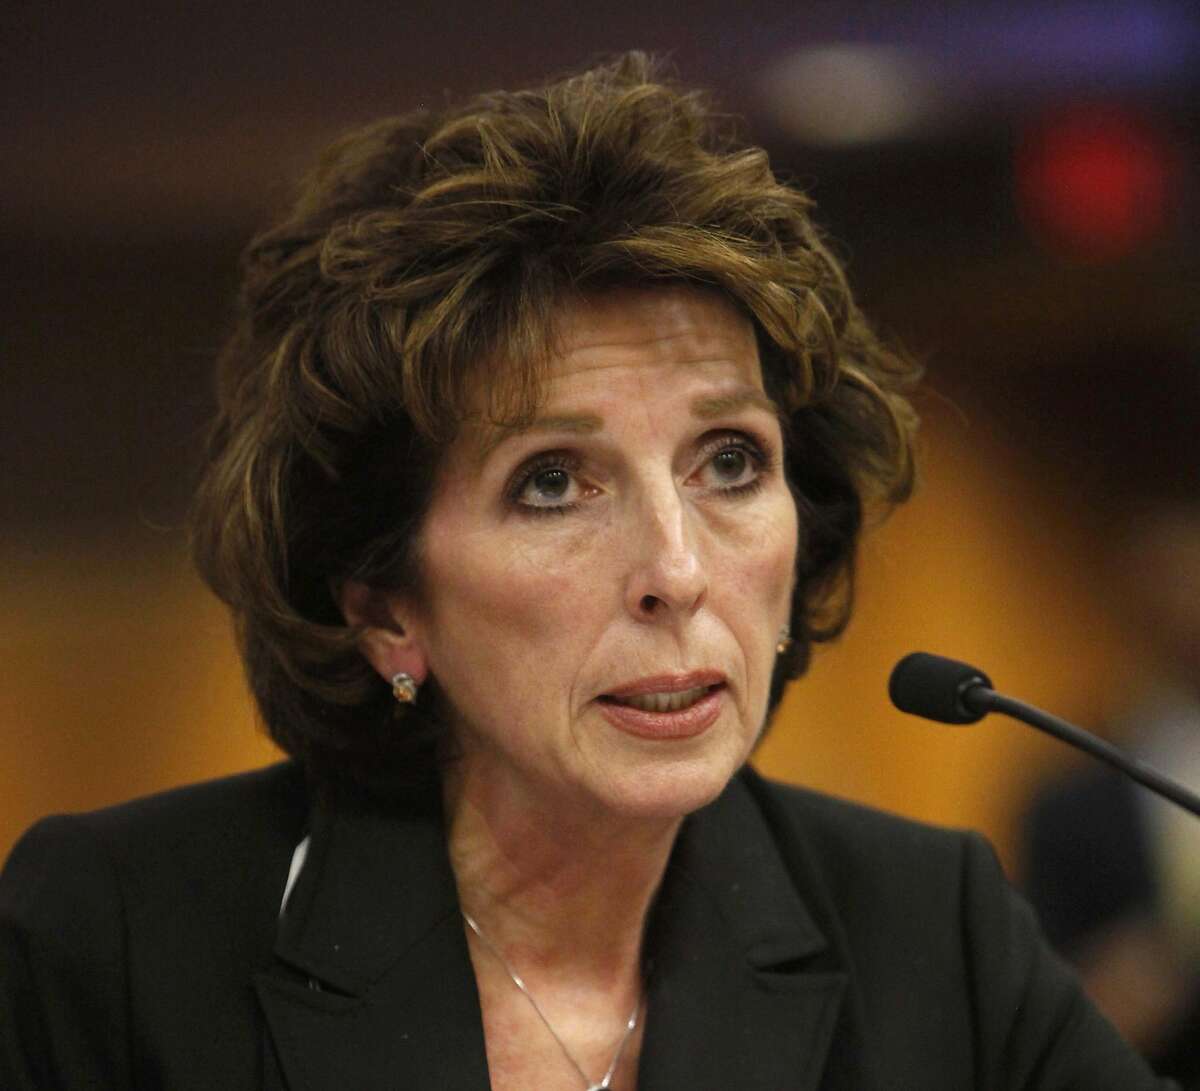 FILE - In this Dec. 14, 2011 file photo, University of California, Davis, Chancellor Linda Katehi, told lawmakers that she never ordered campus police to use force or pepper spray on students last month, while testifying at a legislative hearing at the Capitol in Sacramento, Calif. Katehi has been placed on leave amid an uproar stemming in part from the school's hiring of consultants to improve its image, following a widely criticized protest pepper spraying incident by police. UC President Janet Napolitano's office announced Wednesday, April 27, 2016, that she is appointing an outside investigator to determine whether the actions of Chancellor Katehi have violated university policies. (AP Photo/Rich Pedroncelli, File)